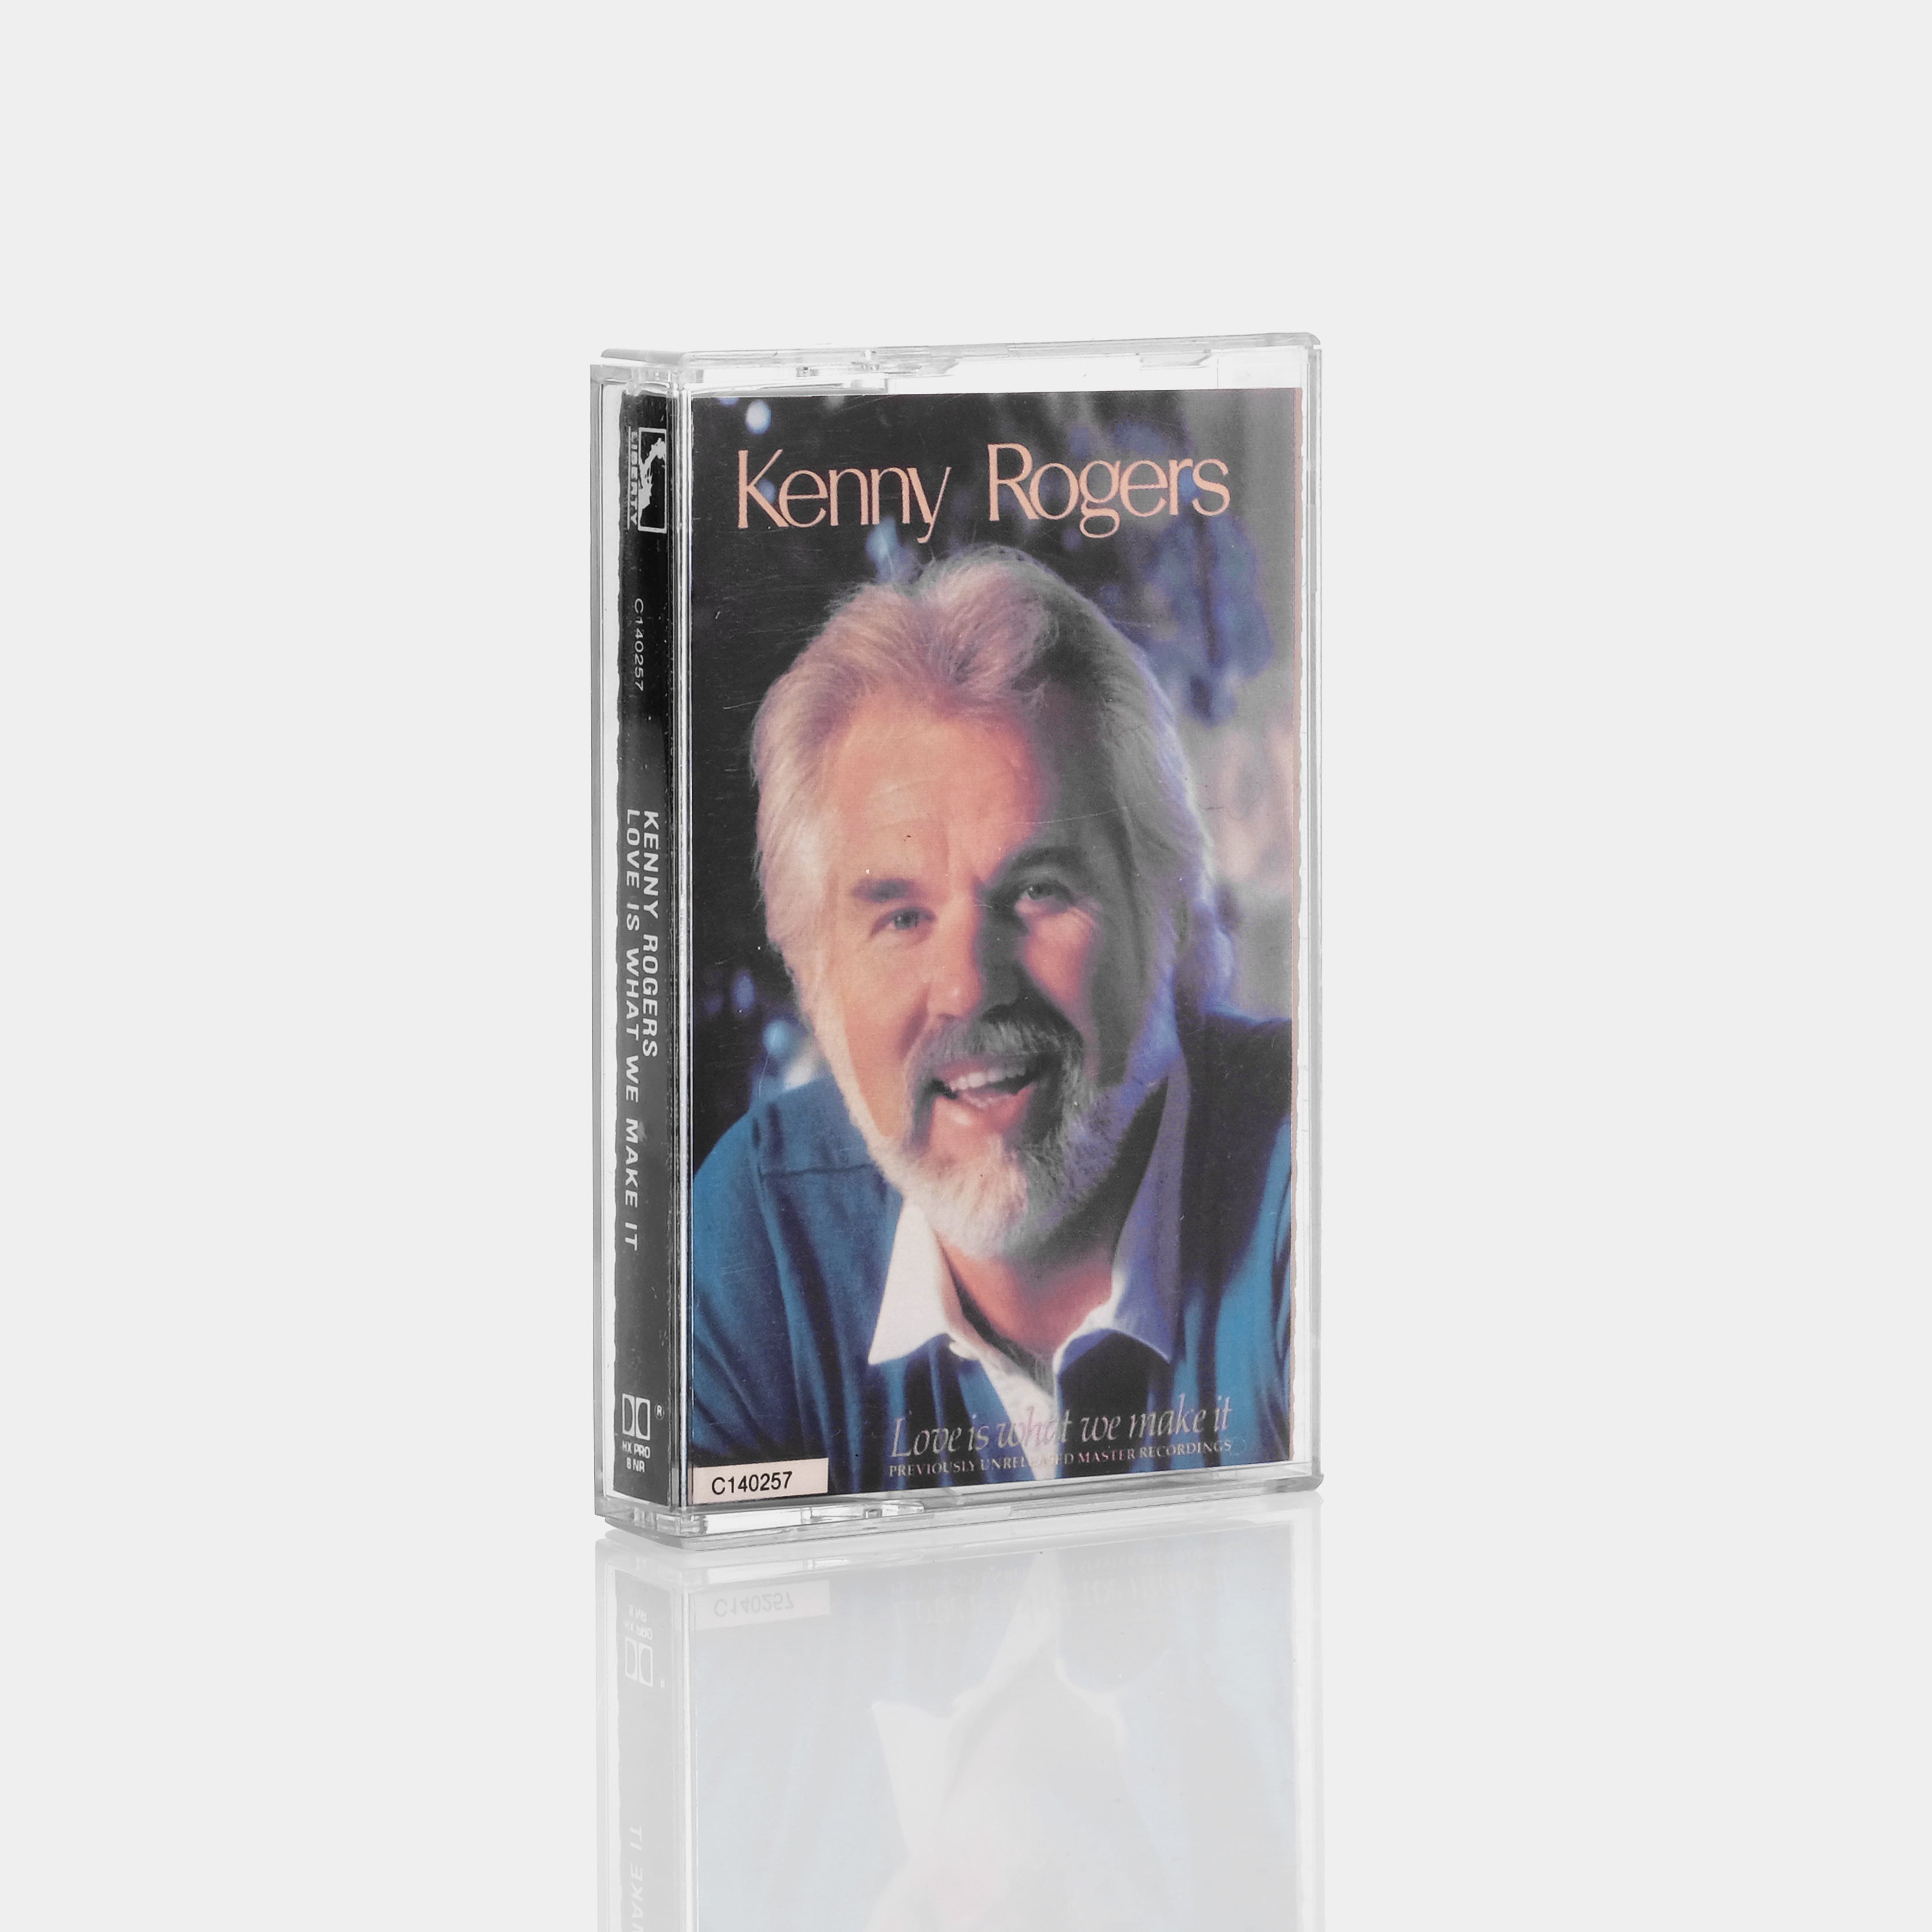 Kenny Rogers - Love Is What We Make It Cassette Tape